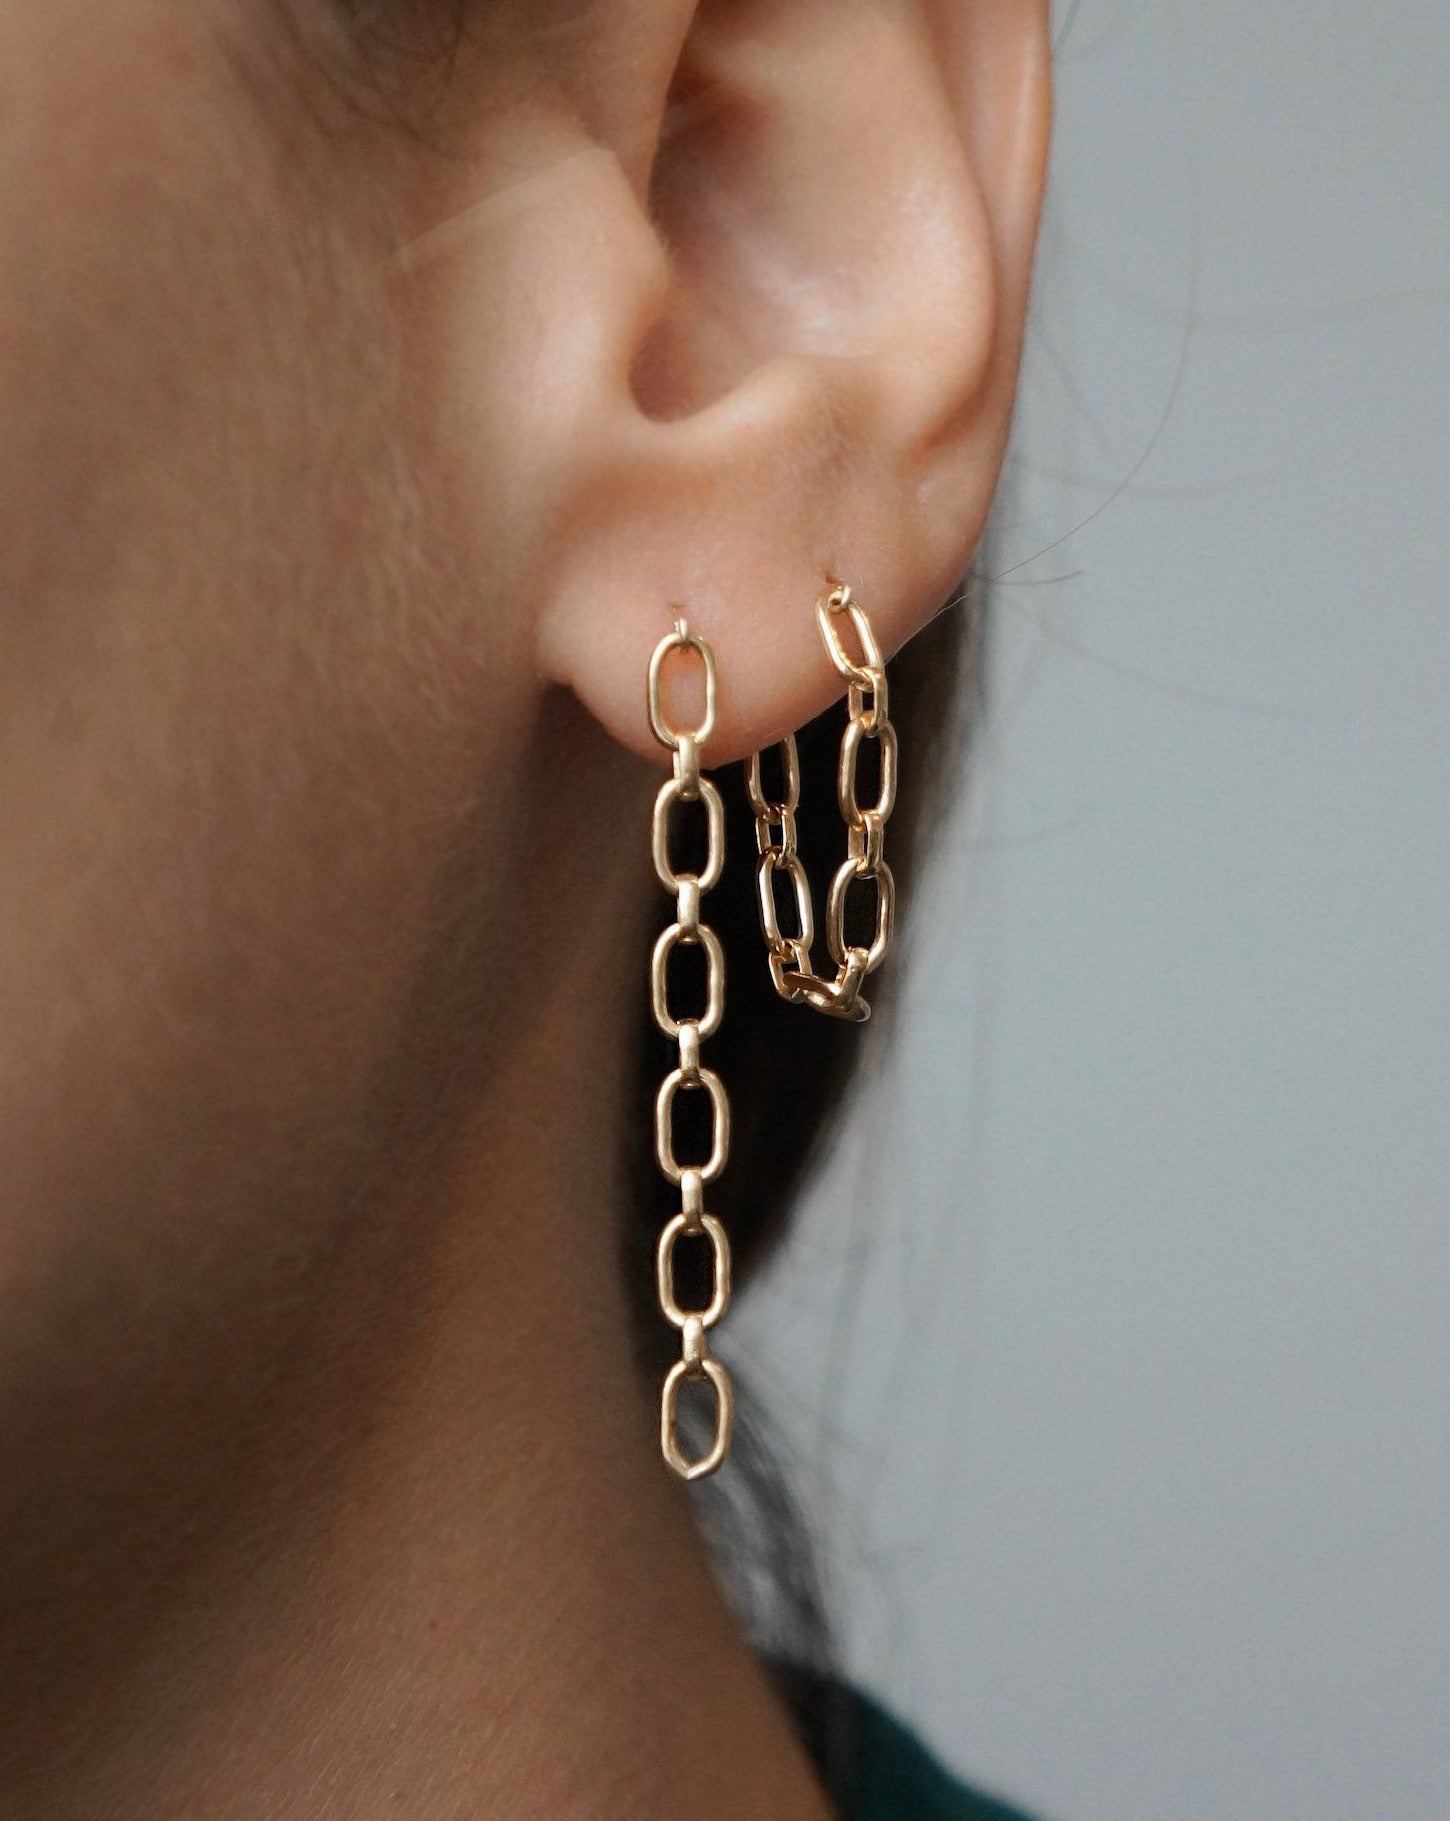 Finito Earrings by KOZAKH. 1.5 inch drop chain earrings, crafted in 14K Gold Filled.